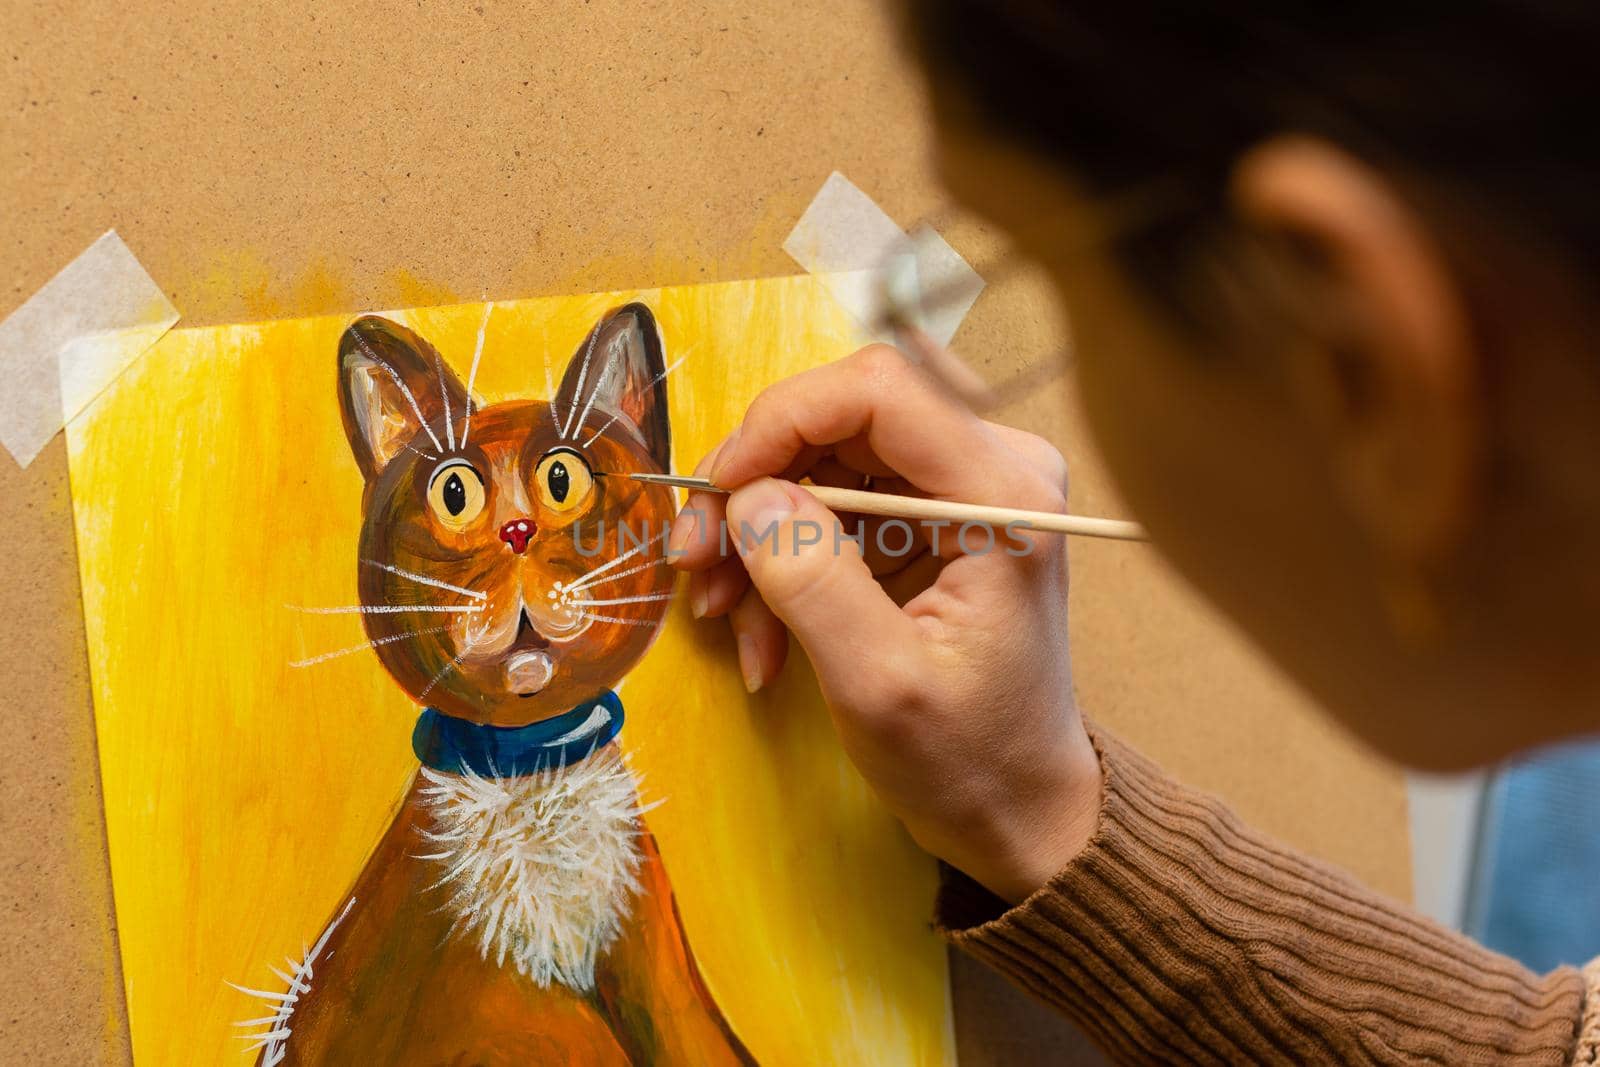 The artist draws with acrylic paints a drawing of a cat on an easel, close-up by Madhourse